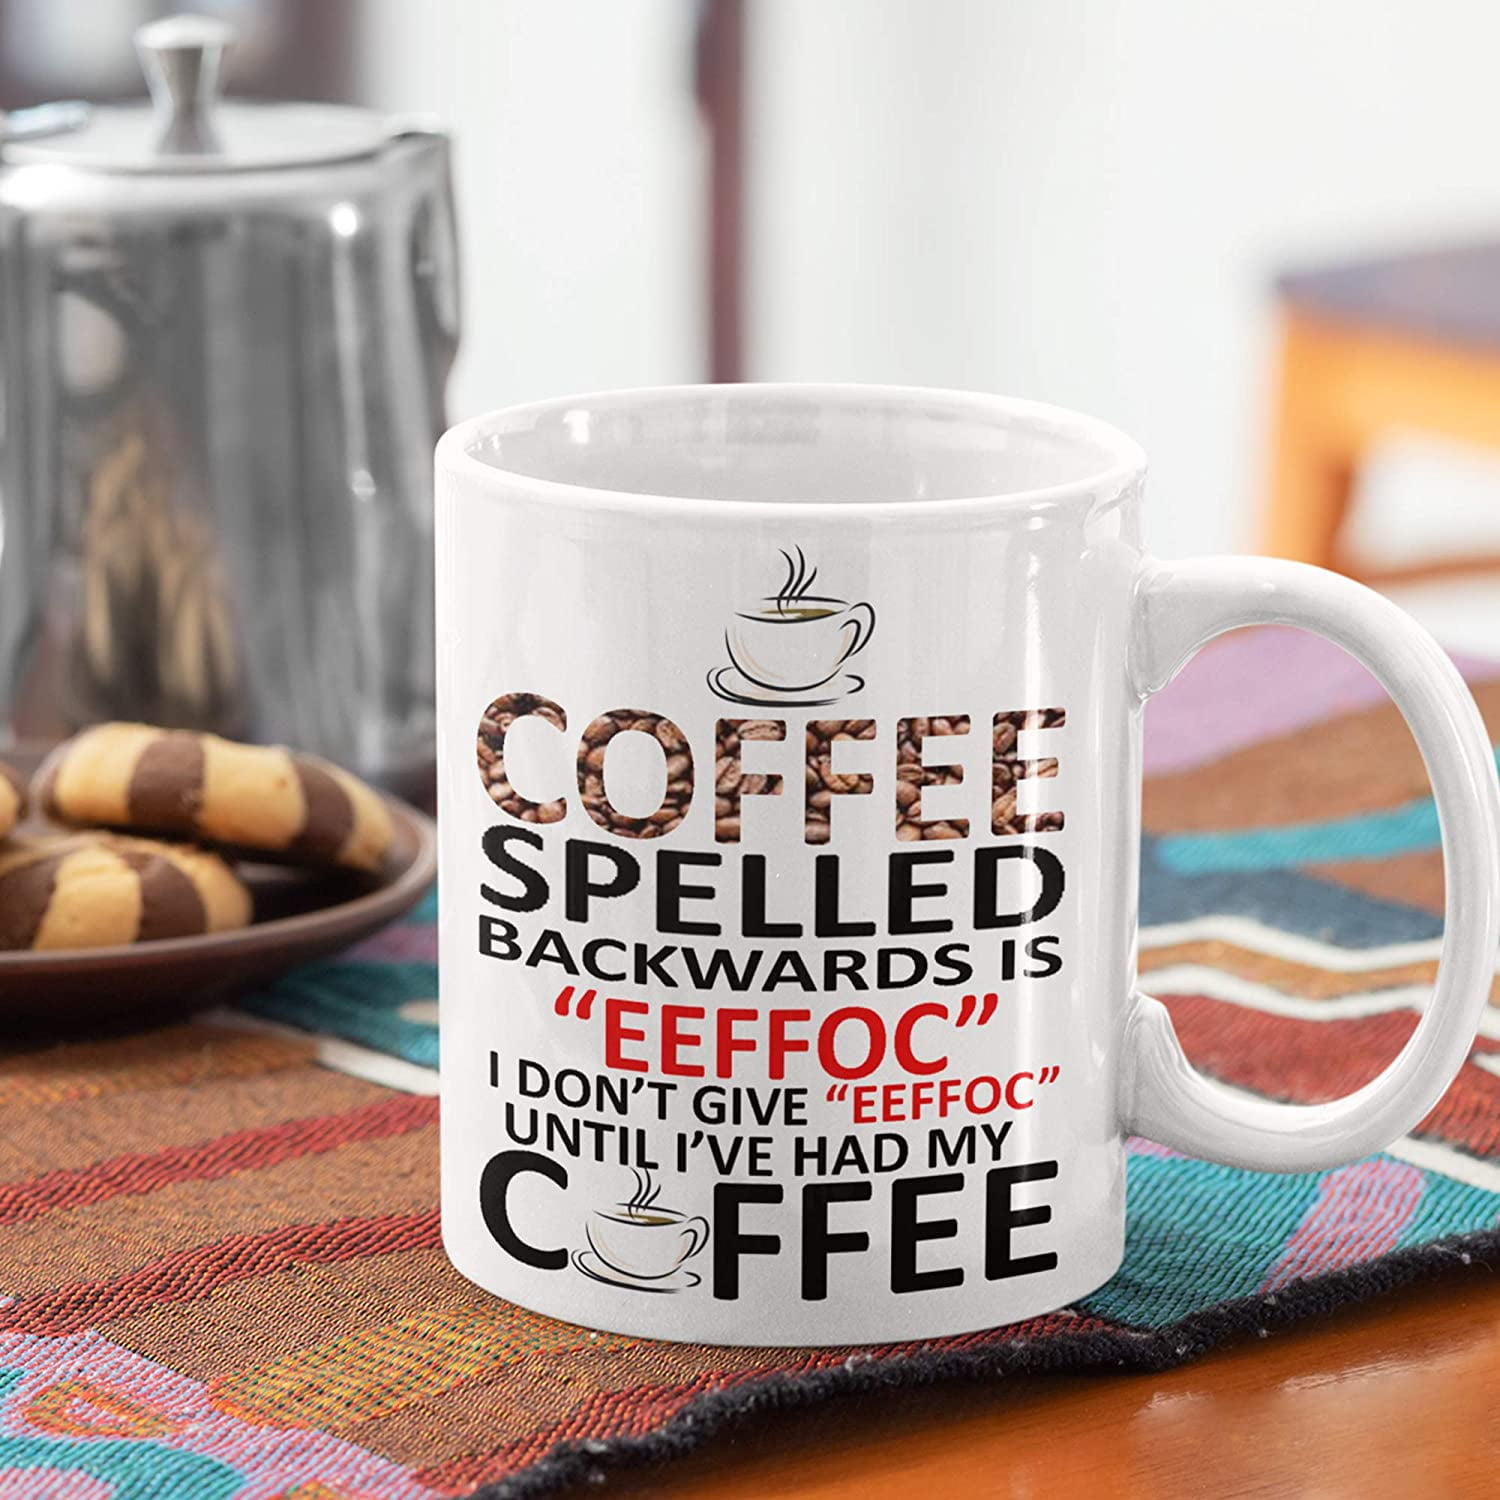  Panvola Coffee Lover Gifts - Coffee Spelled Backward As I Don't  Give Eeffoc Until I Had My Coffee Mug 11 oz - Gifts for Office Coworkers  Boss : Home & Kitchen